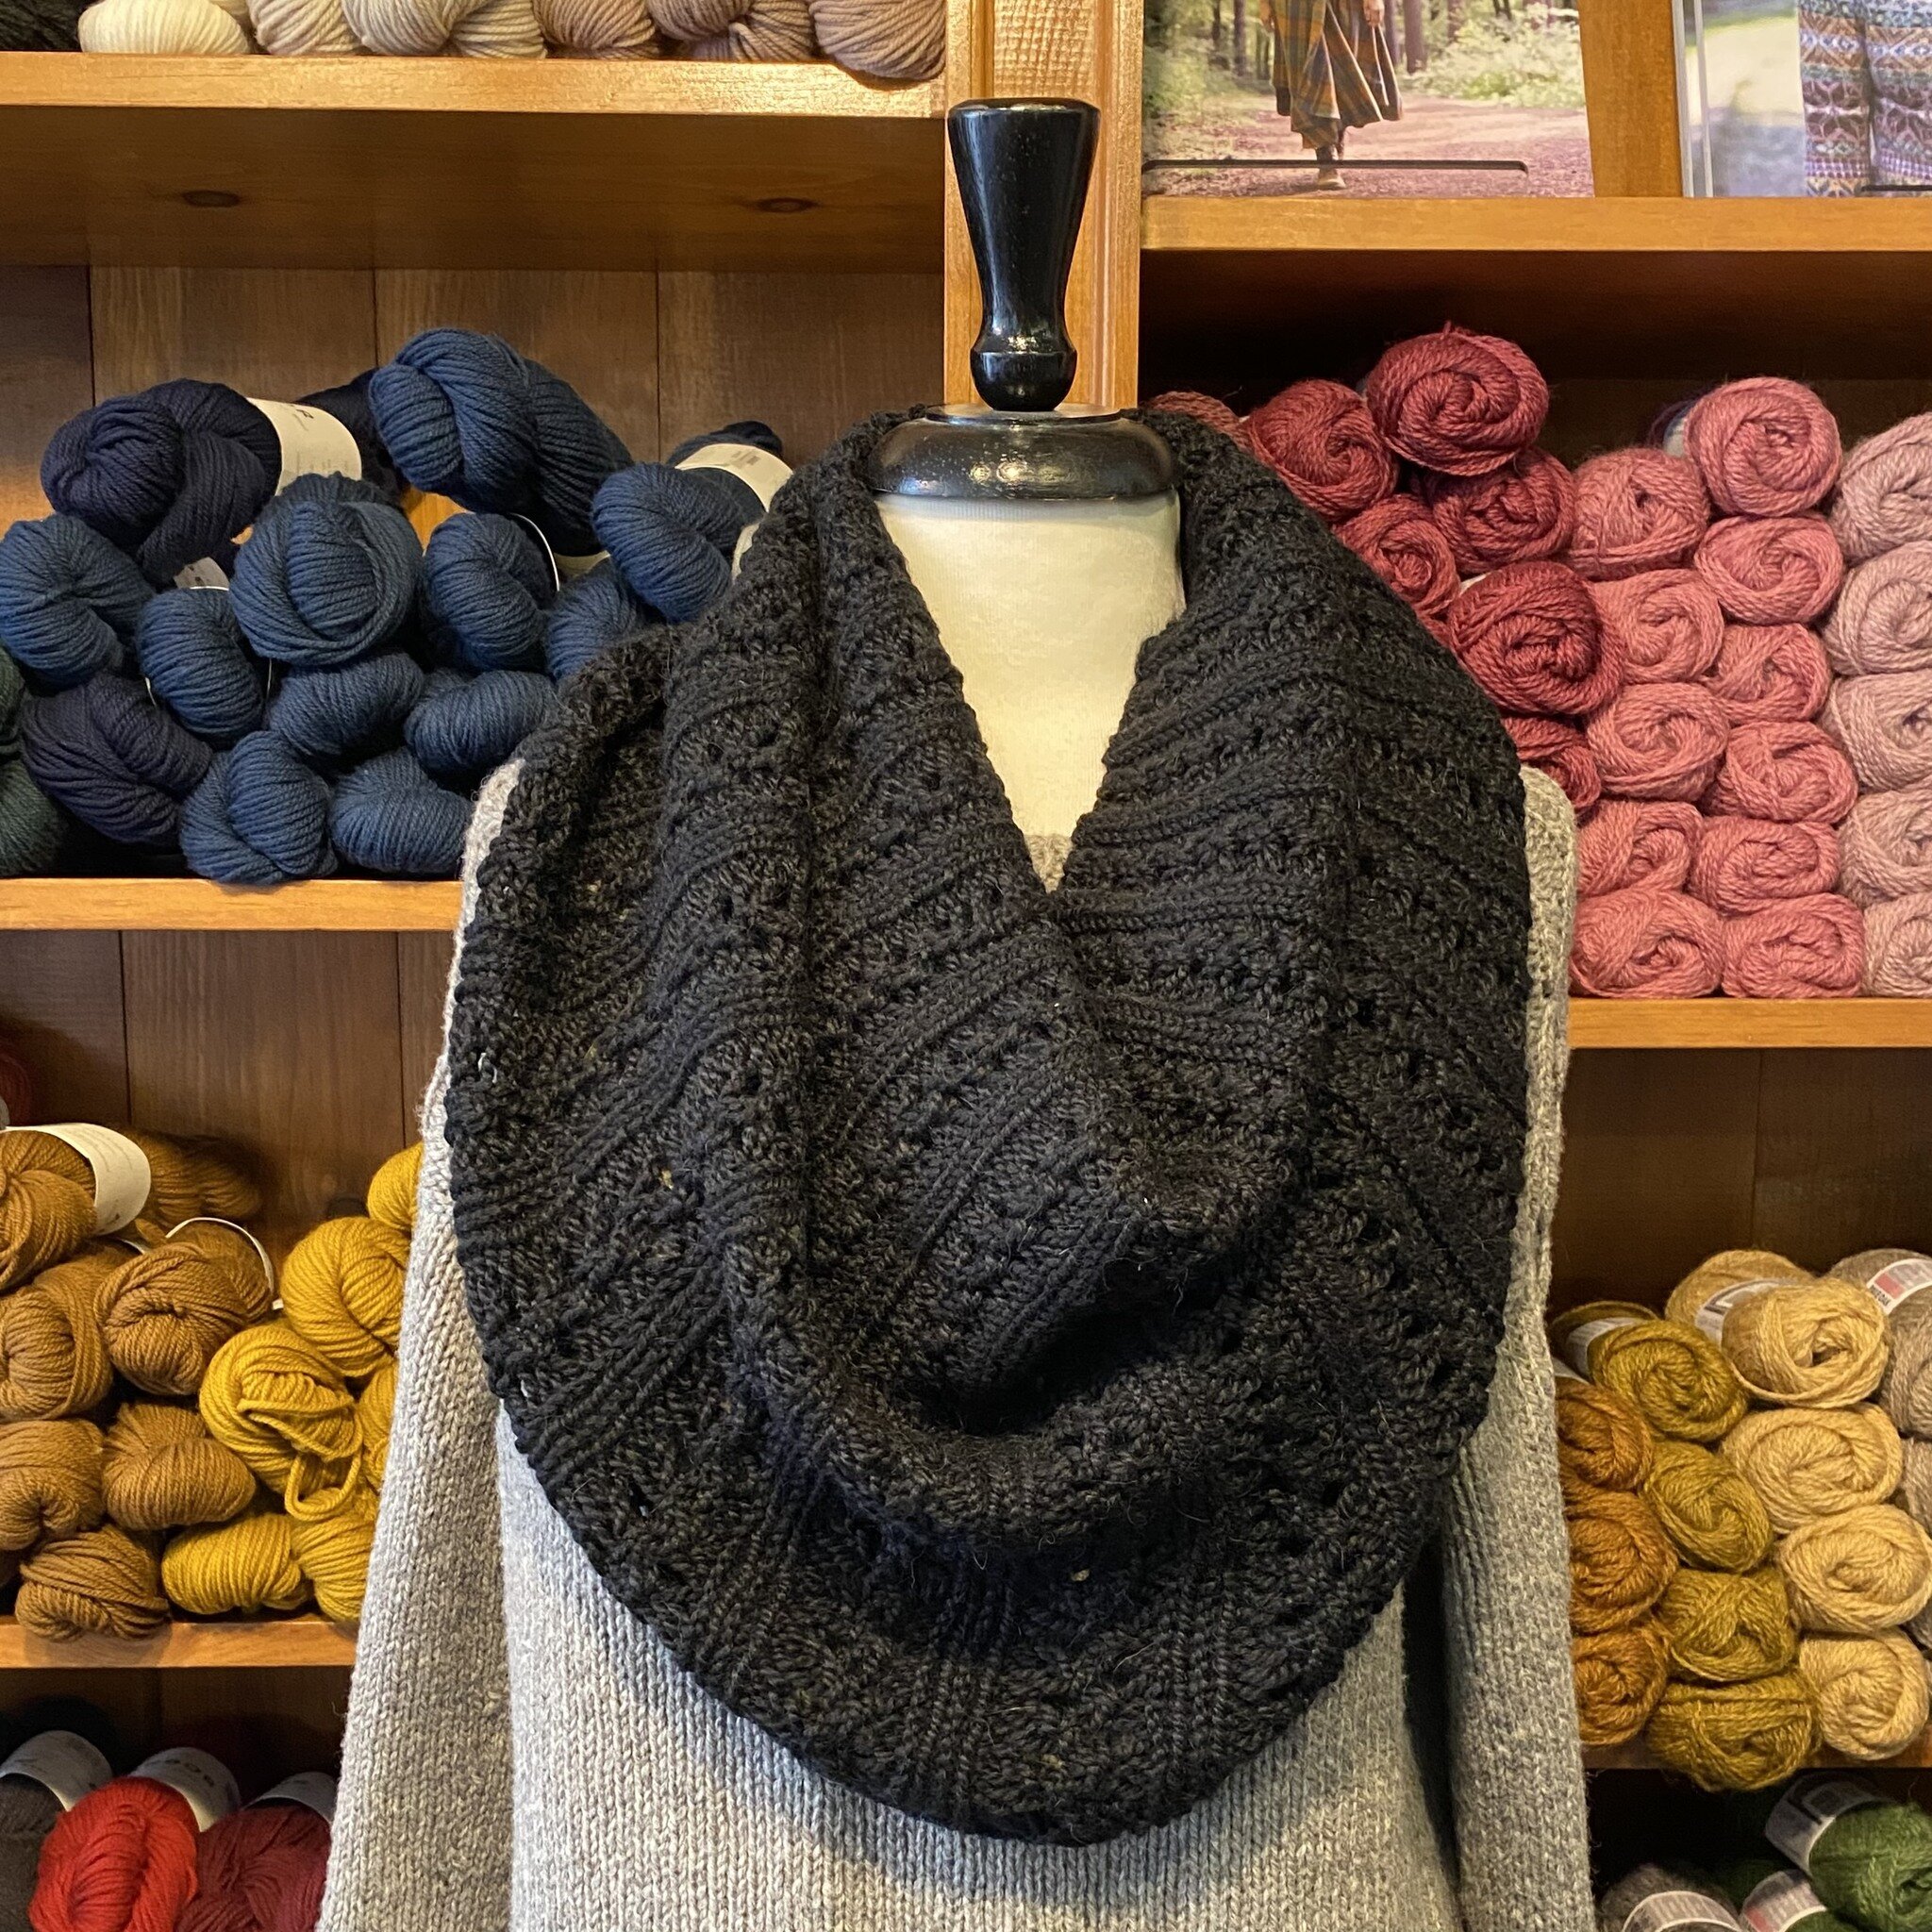 Our sample of Cryin' Icicles, one of our fall KALs, is on display now! We knit our sample with just two skeins of Blue Sky Fibers Extra. Read more about our fall KALs and find a participant discount code using the link in bio. We cast on September 23